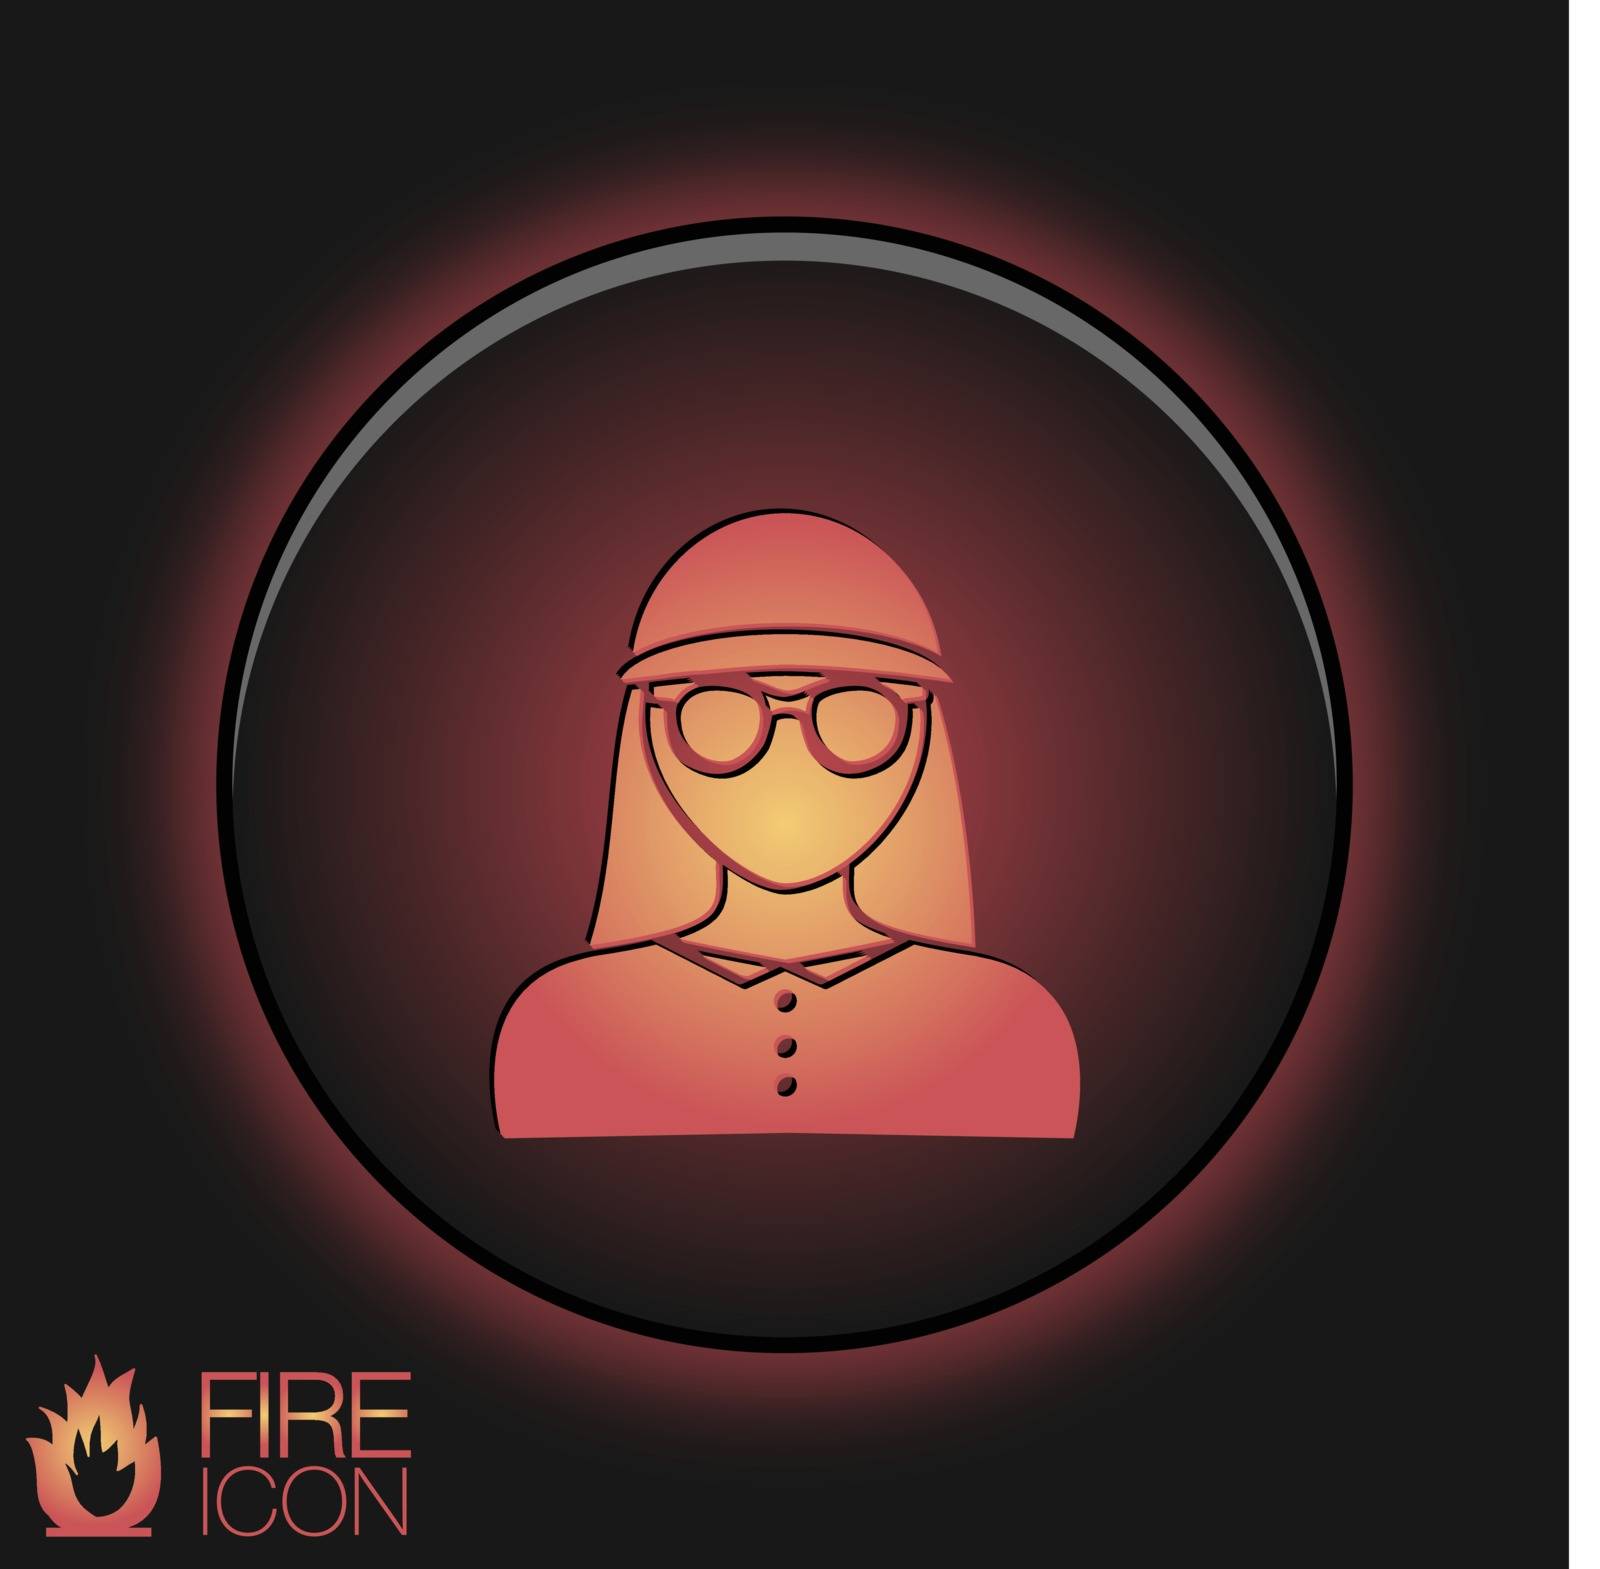 A female avatar. Avatar of a woman. Round icon image girl in glasses and a hat